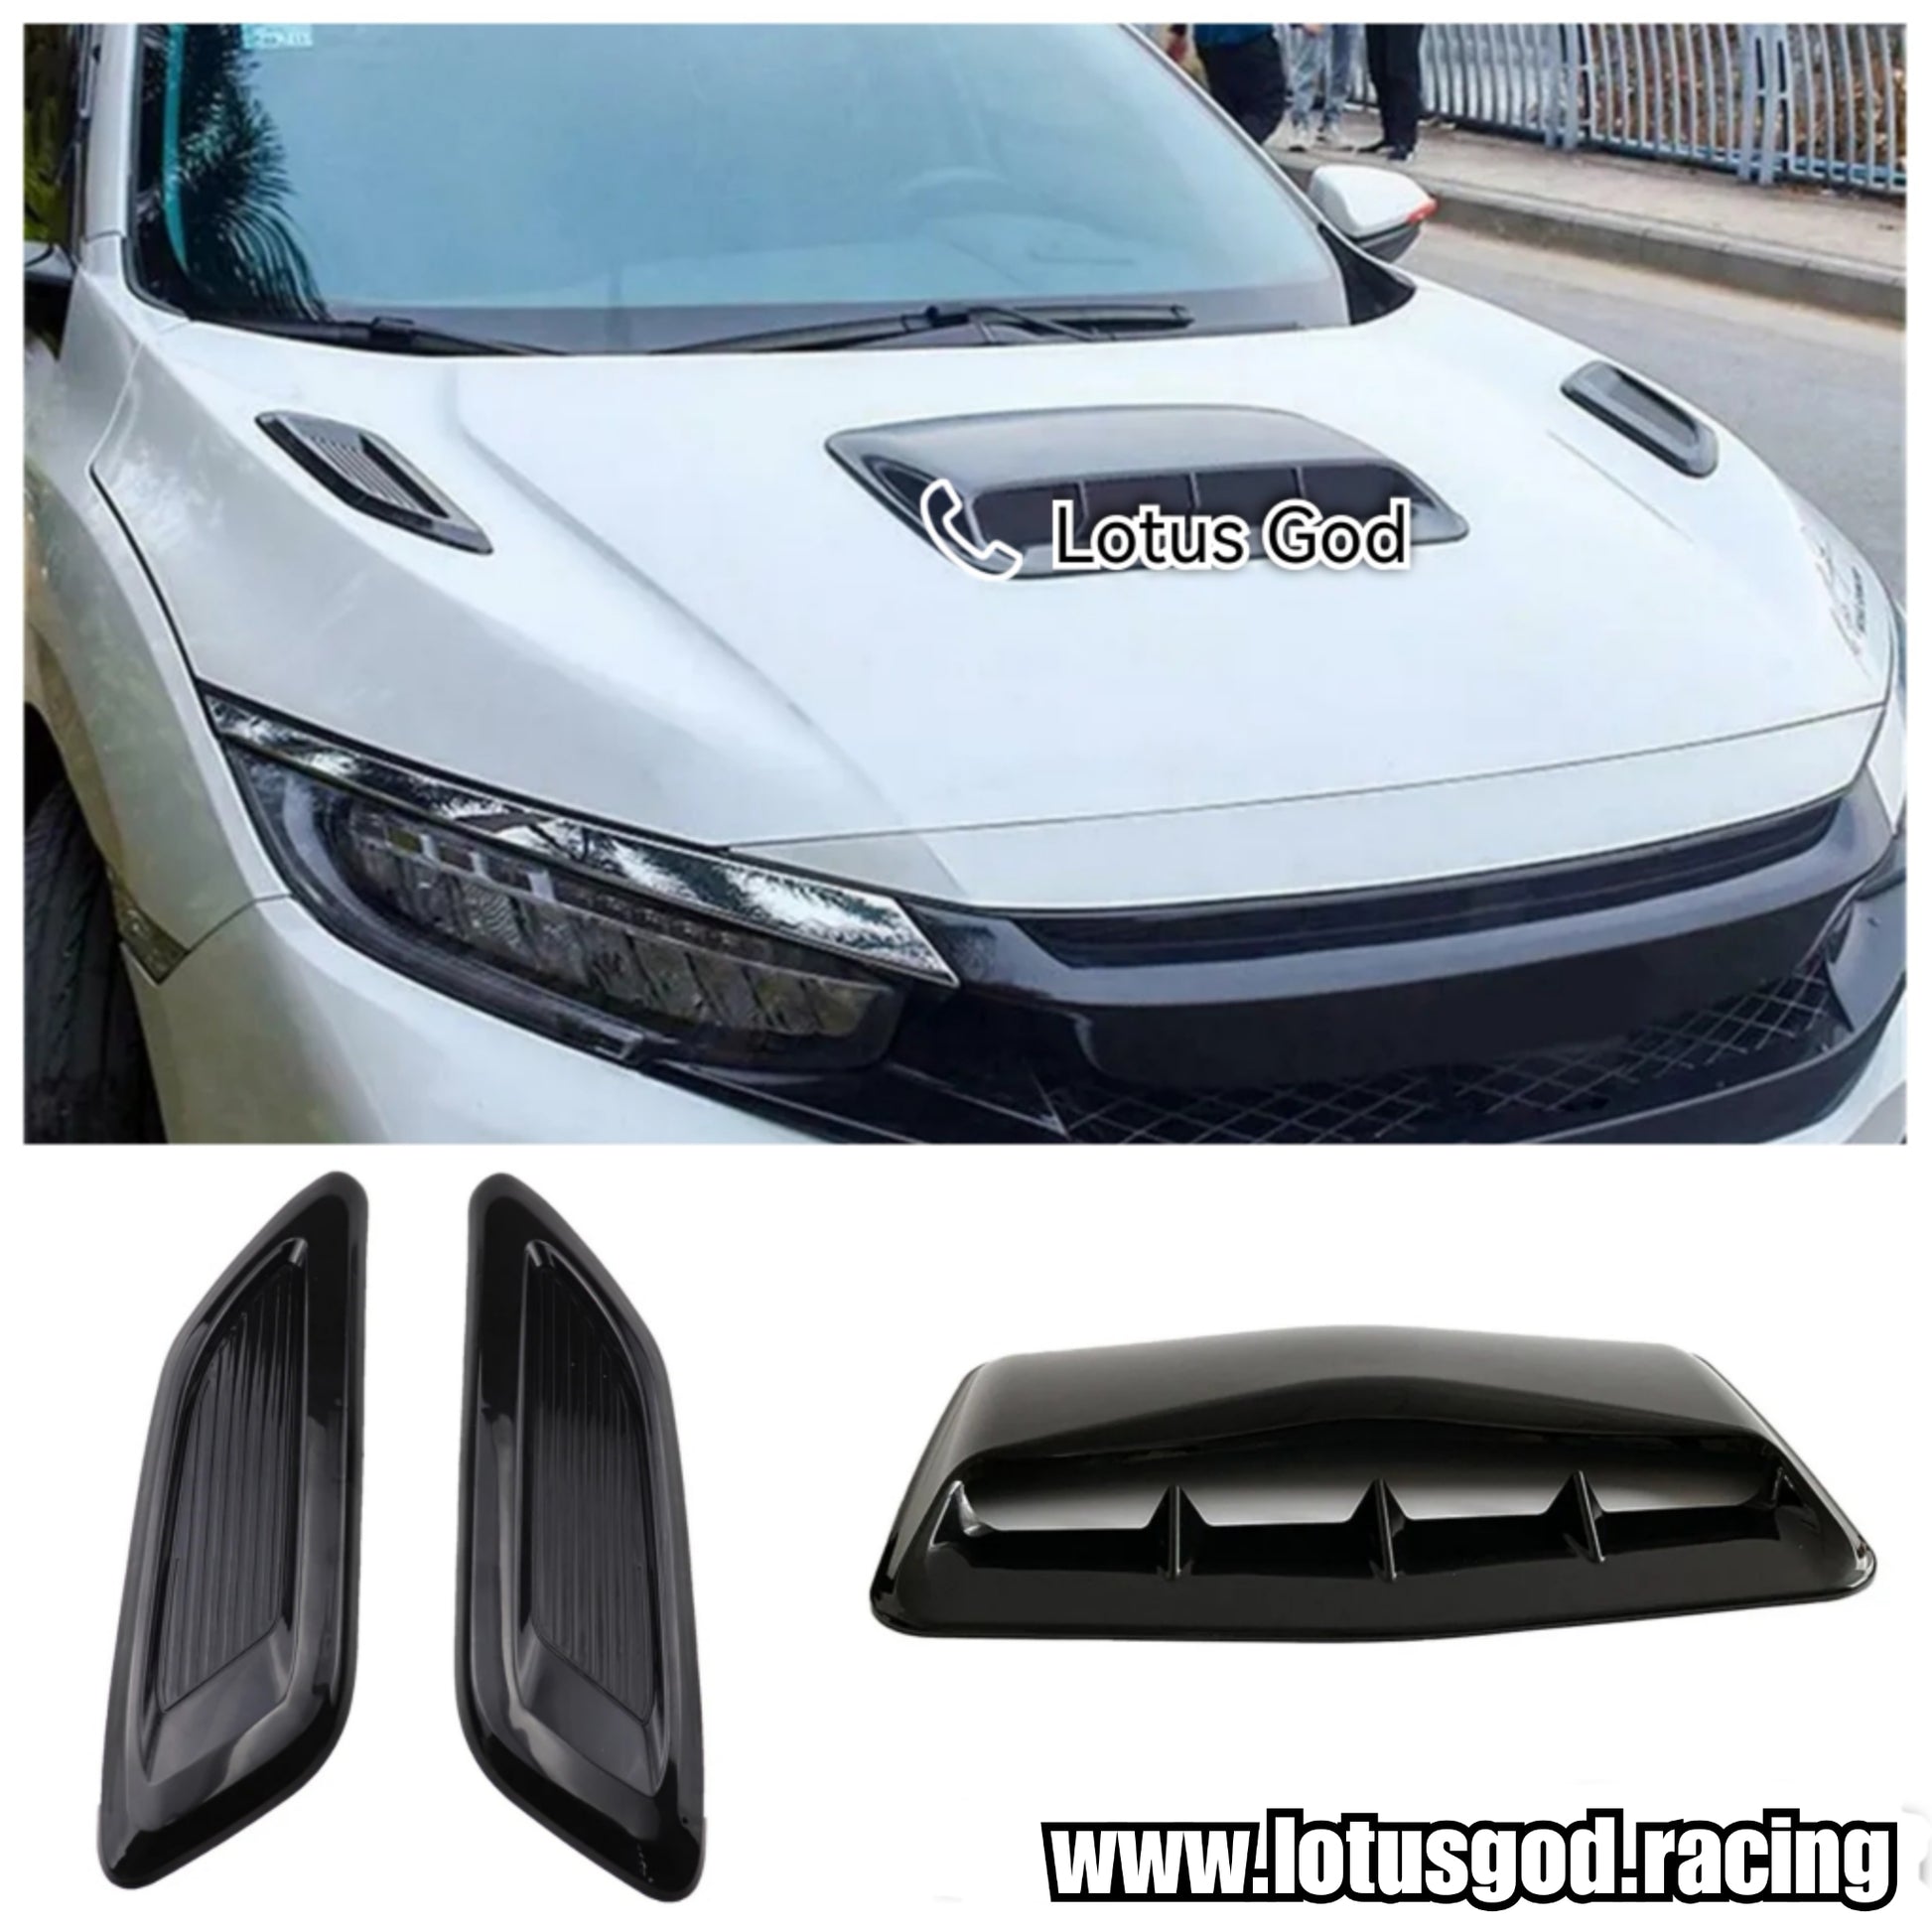 Universal Car-styling Hood Air Flow Intake Vent Cover Sticker